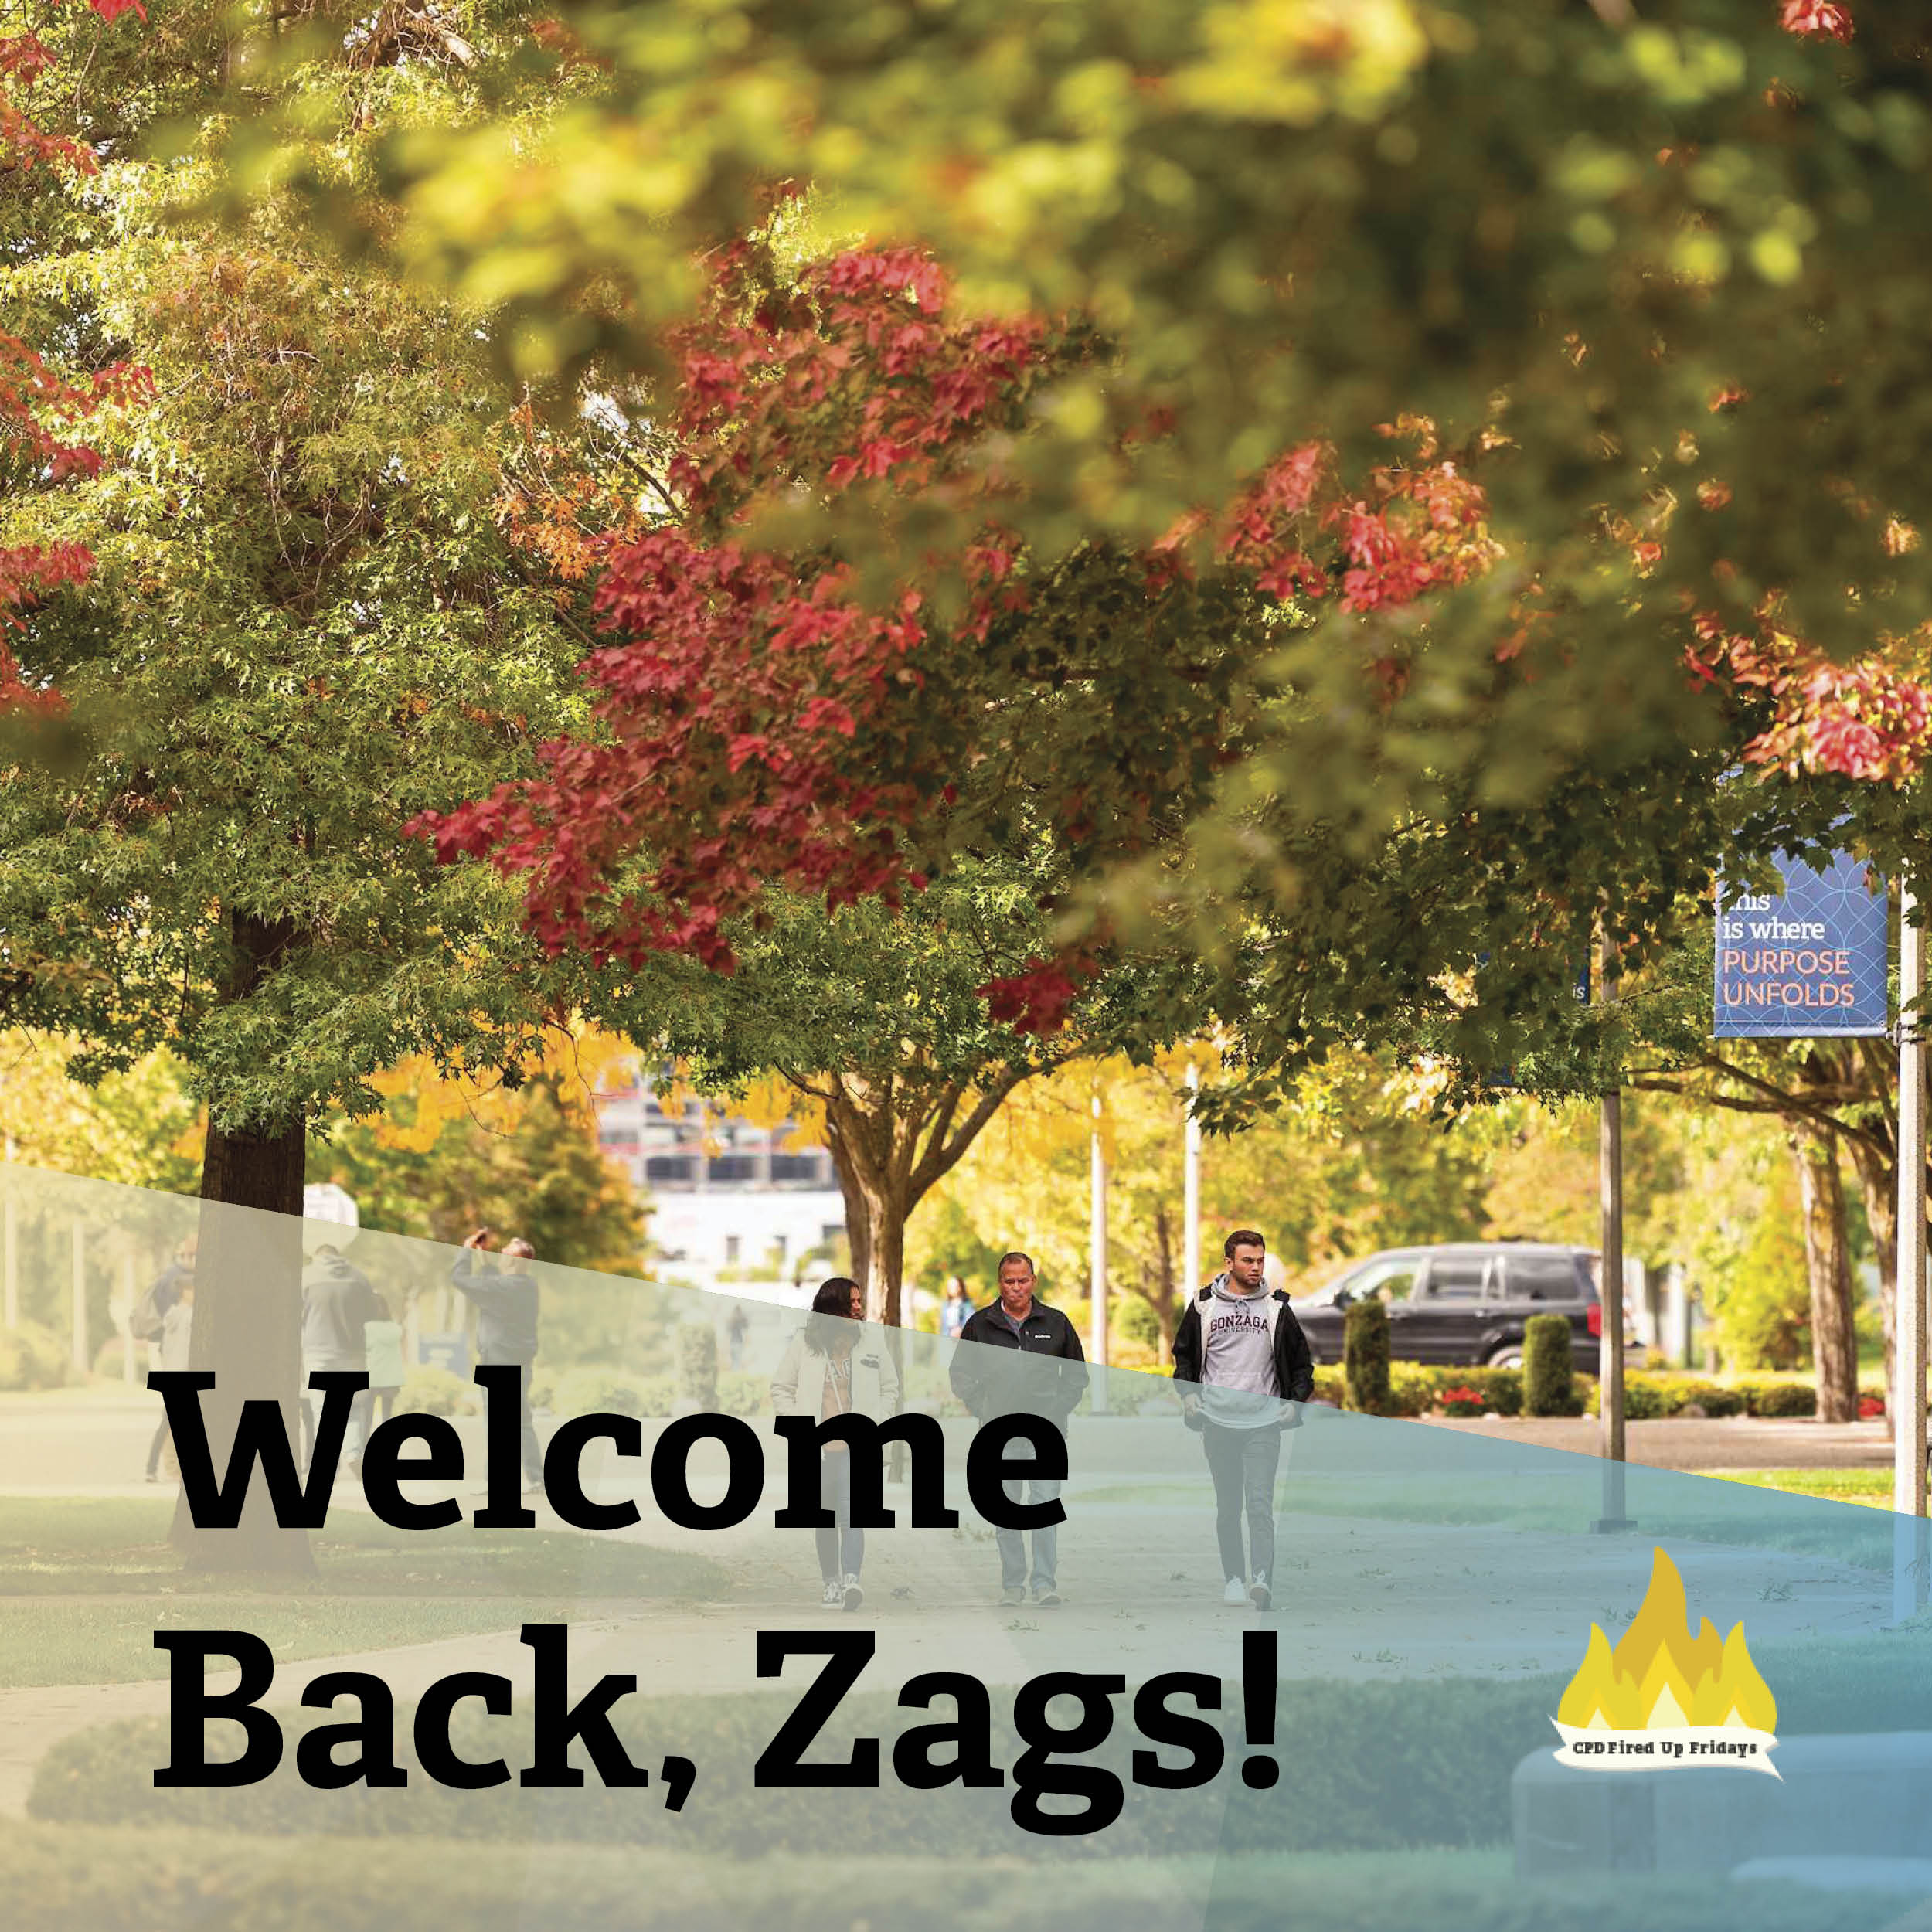 A young man with his parents walks across campus. The trees are just starting to turn red. Below, the text reads: 'Welcome Back, Zags!'